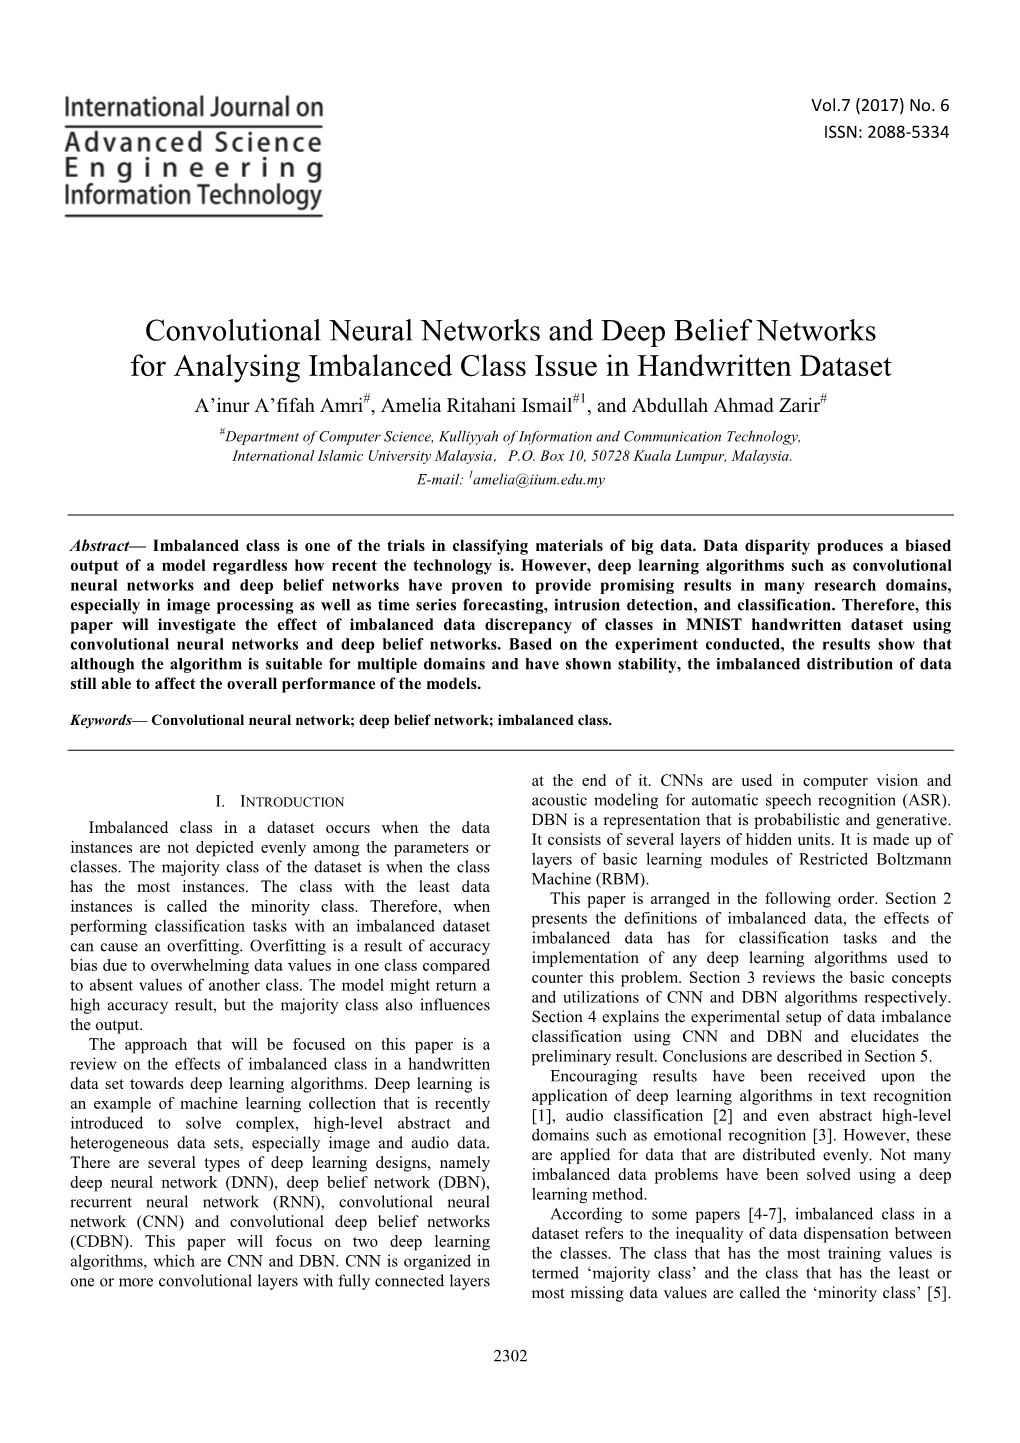 Convolutional Neural Networks and Deep Belief Networks for Analysing